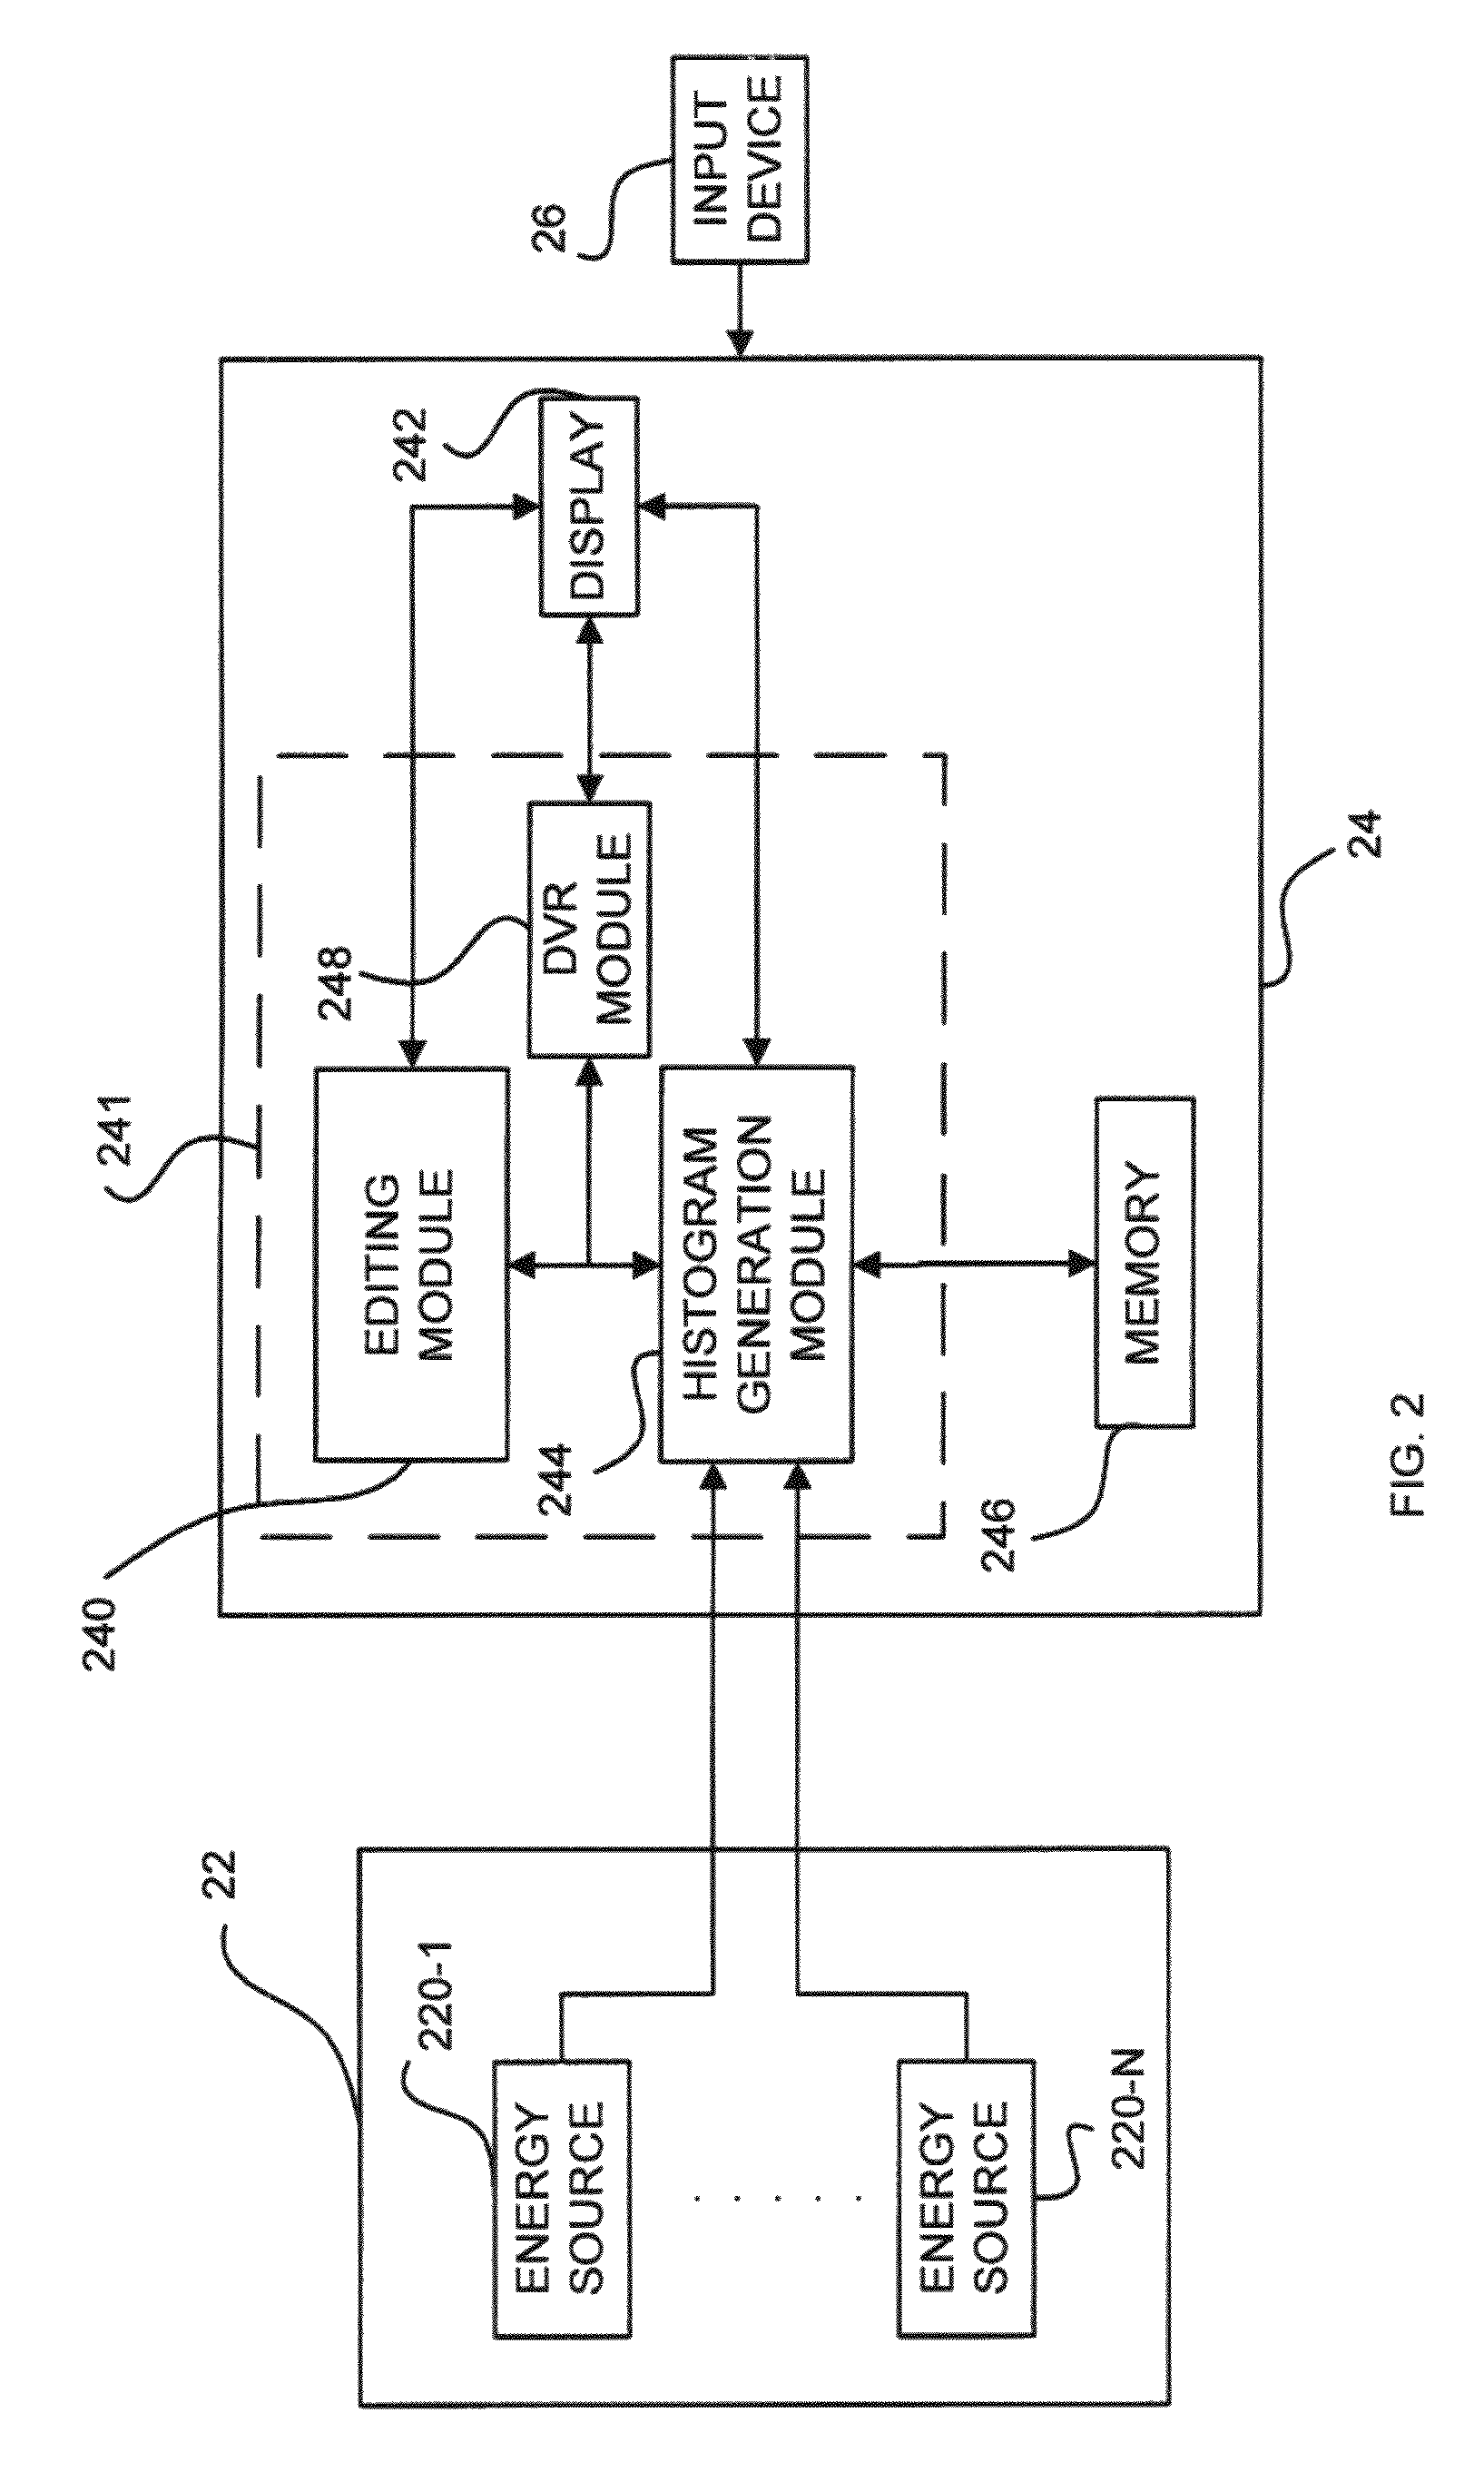 Methods, apparatuses and computer readable mediums for generating images based on multi-energy computed tomography data